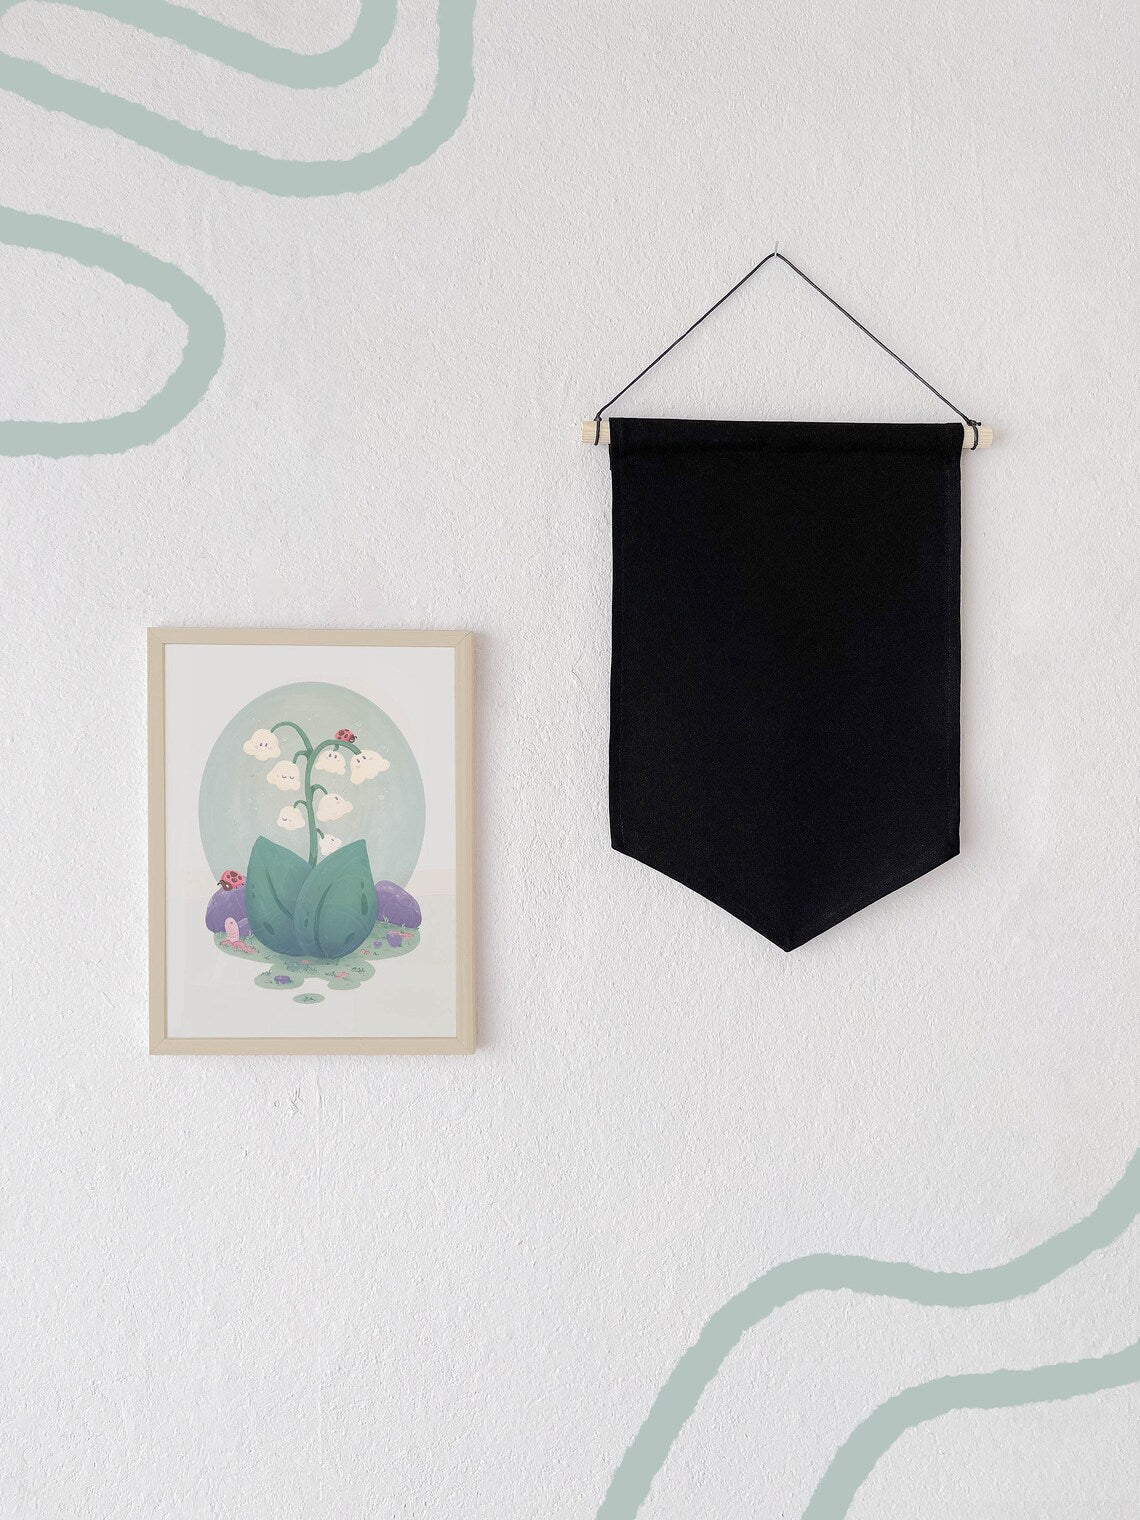 Cute Cotton Pin Banner | XL 25cm x 40cm | Handmade in Germany | Black Canvas Fabric | Classic Pin Display